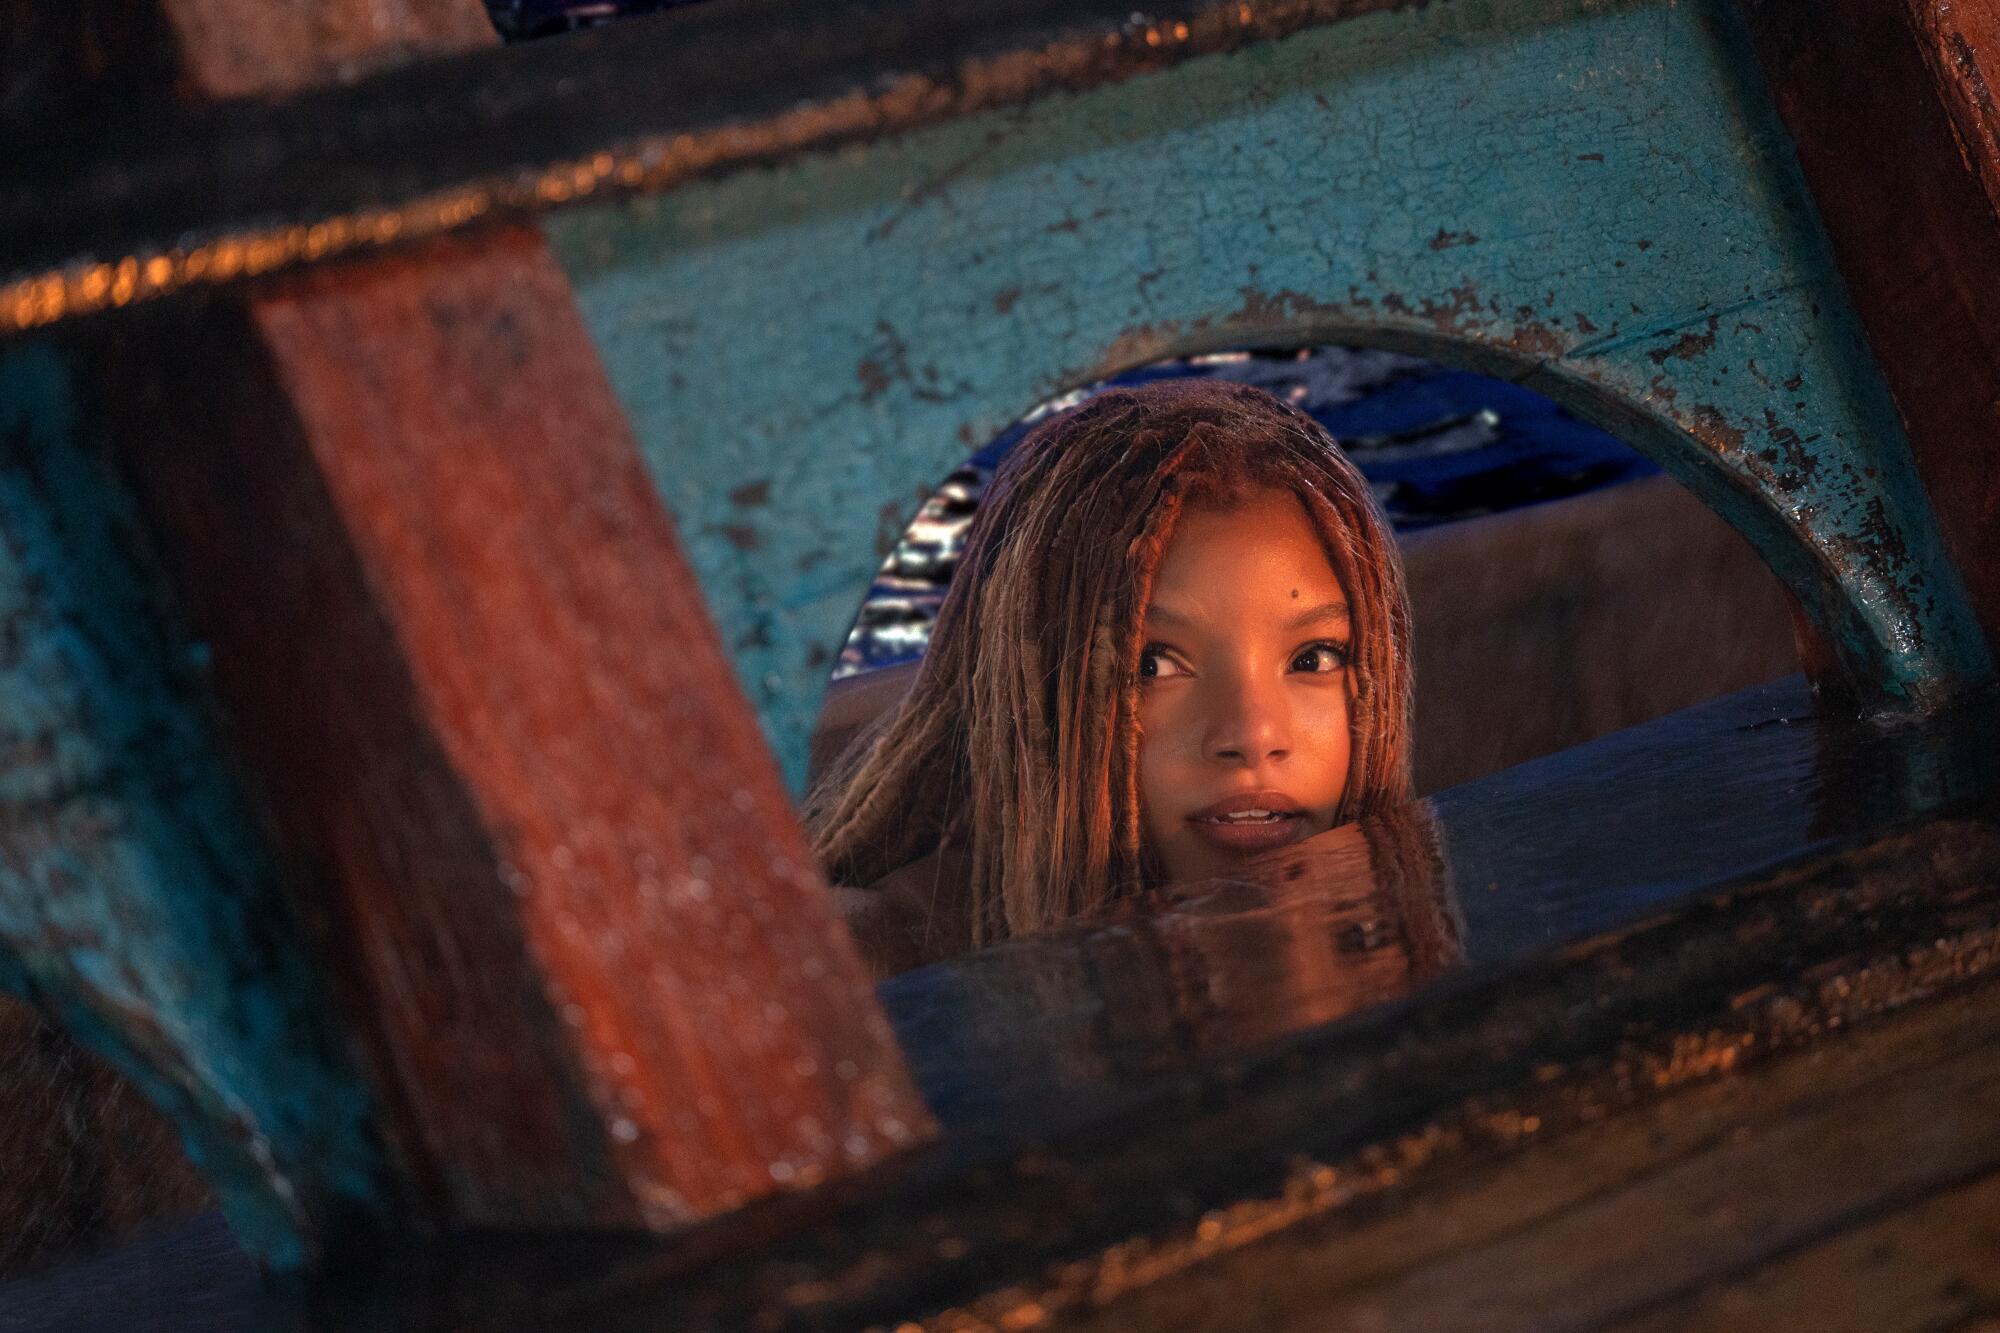 A mermaid pokes her head out of the water beside a ship.